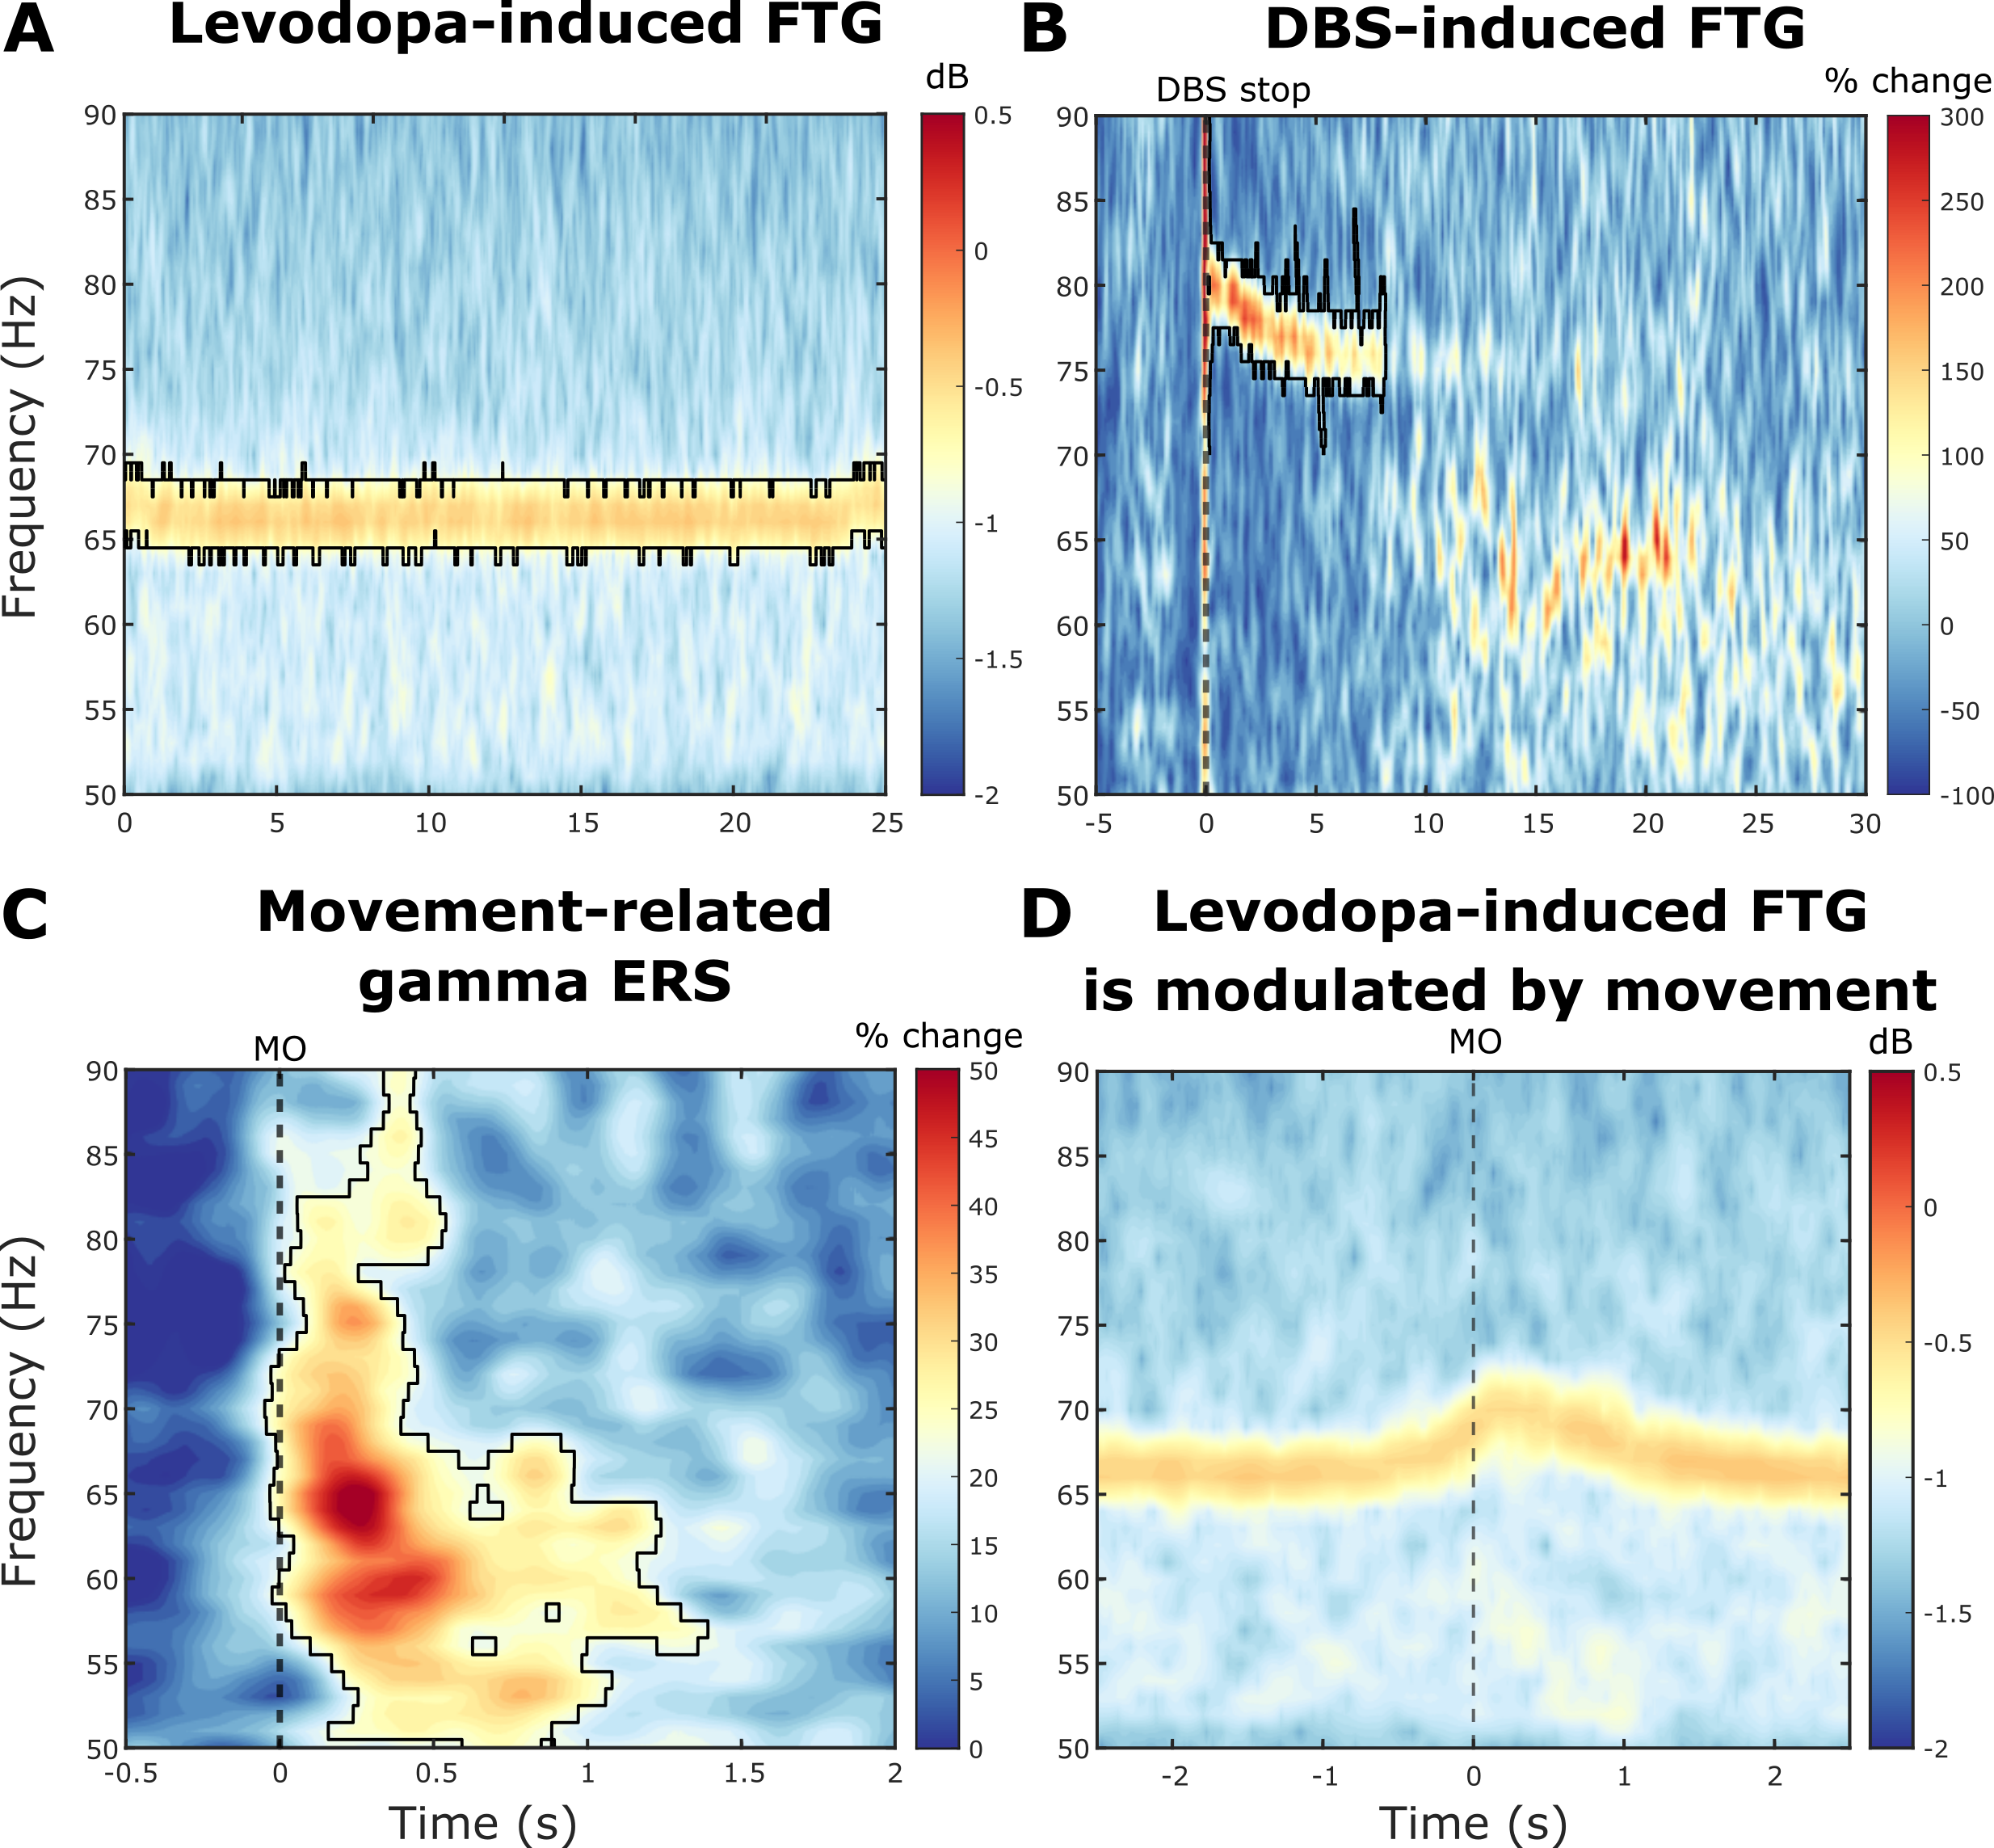 4 coloured data plots (spectrograms) showing how finely-tuned gamma oscillations change with therapeutic intervention and/or movement.